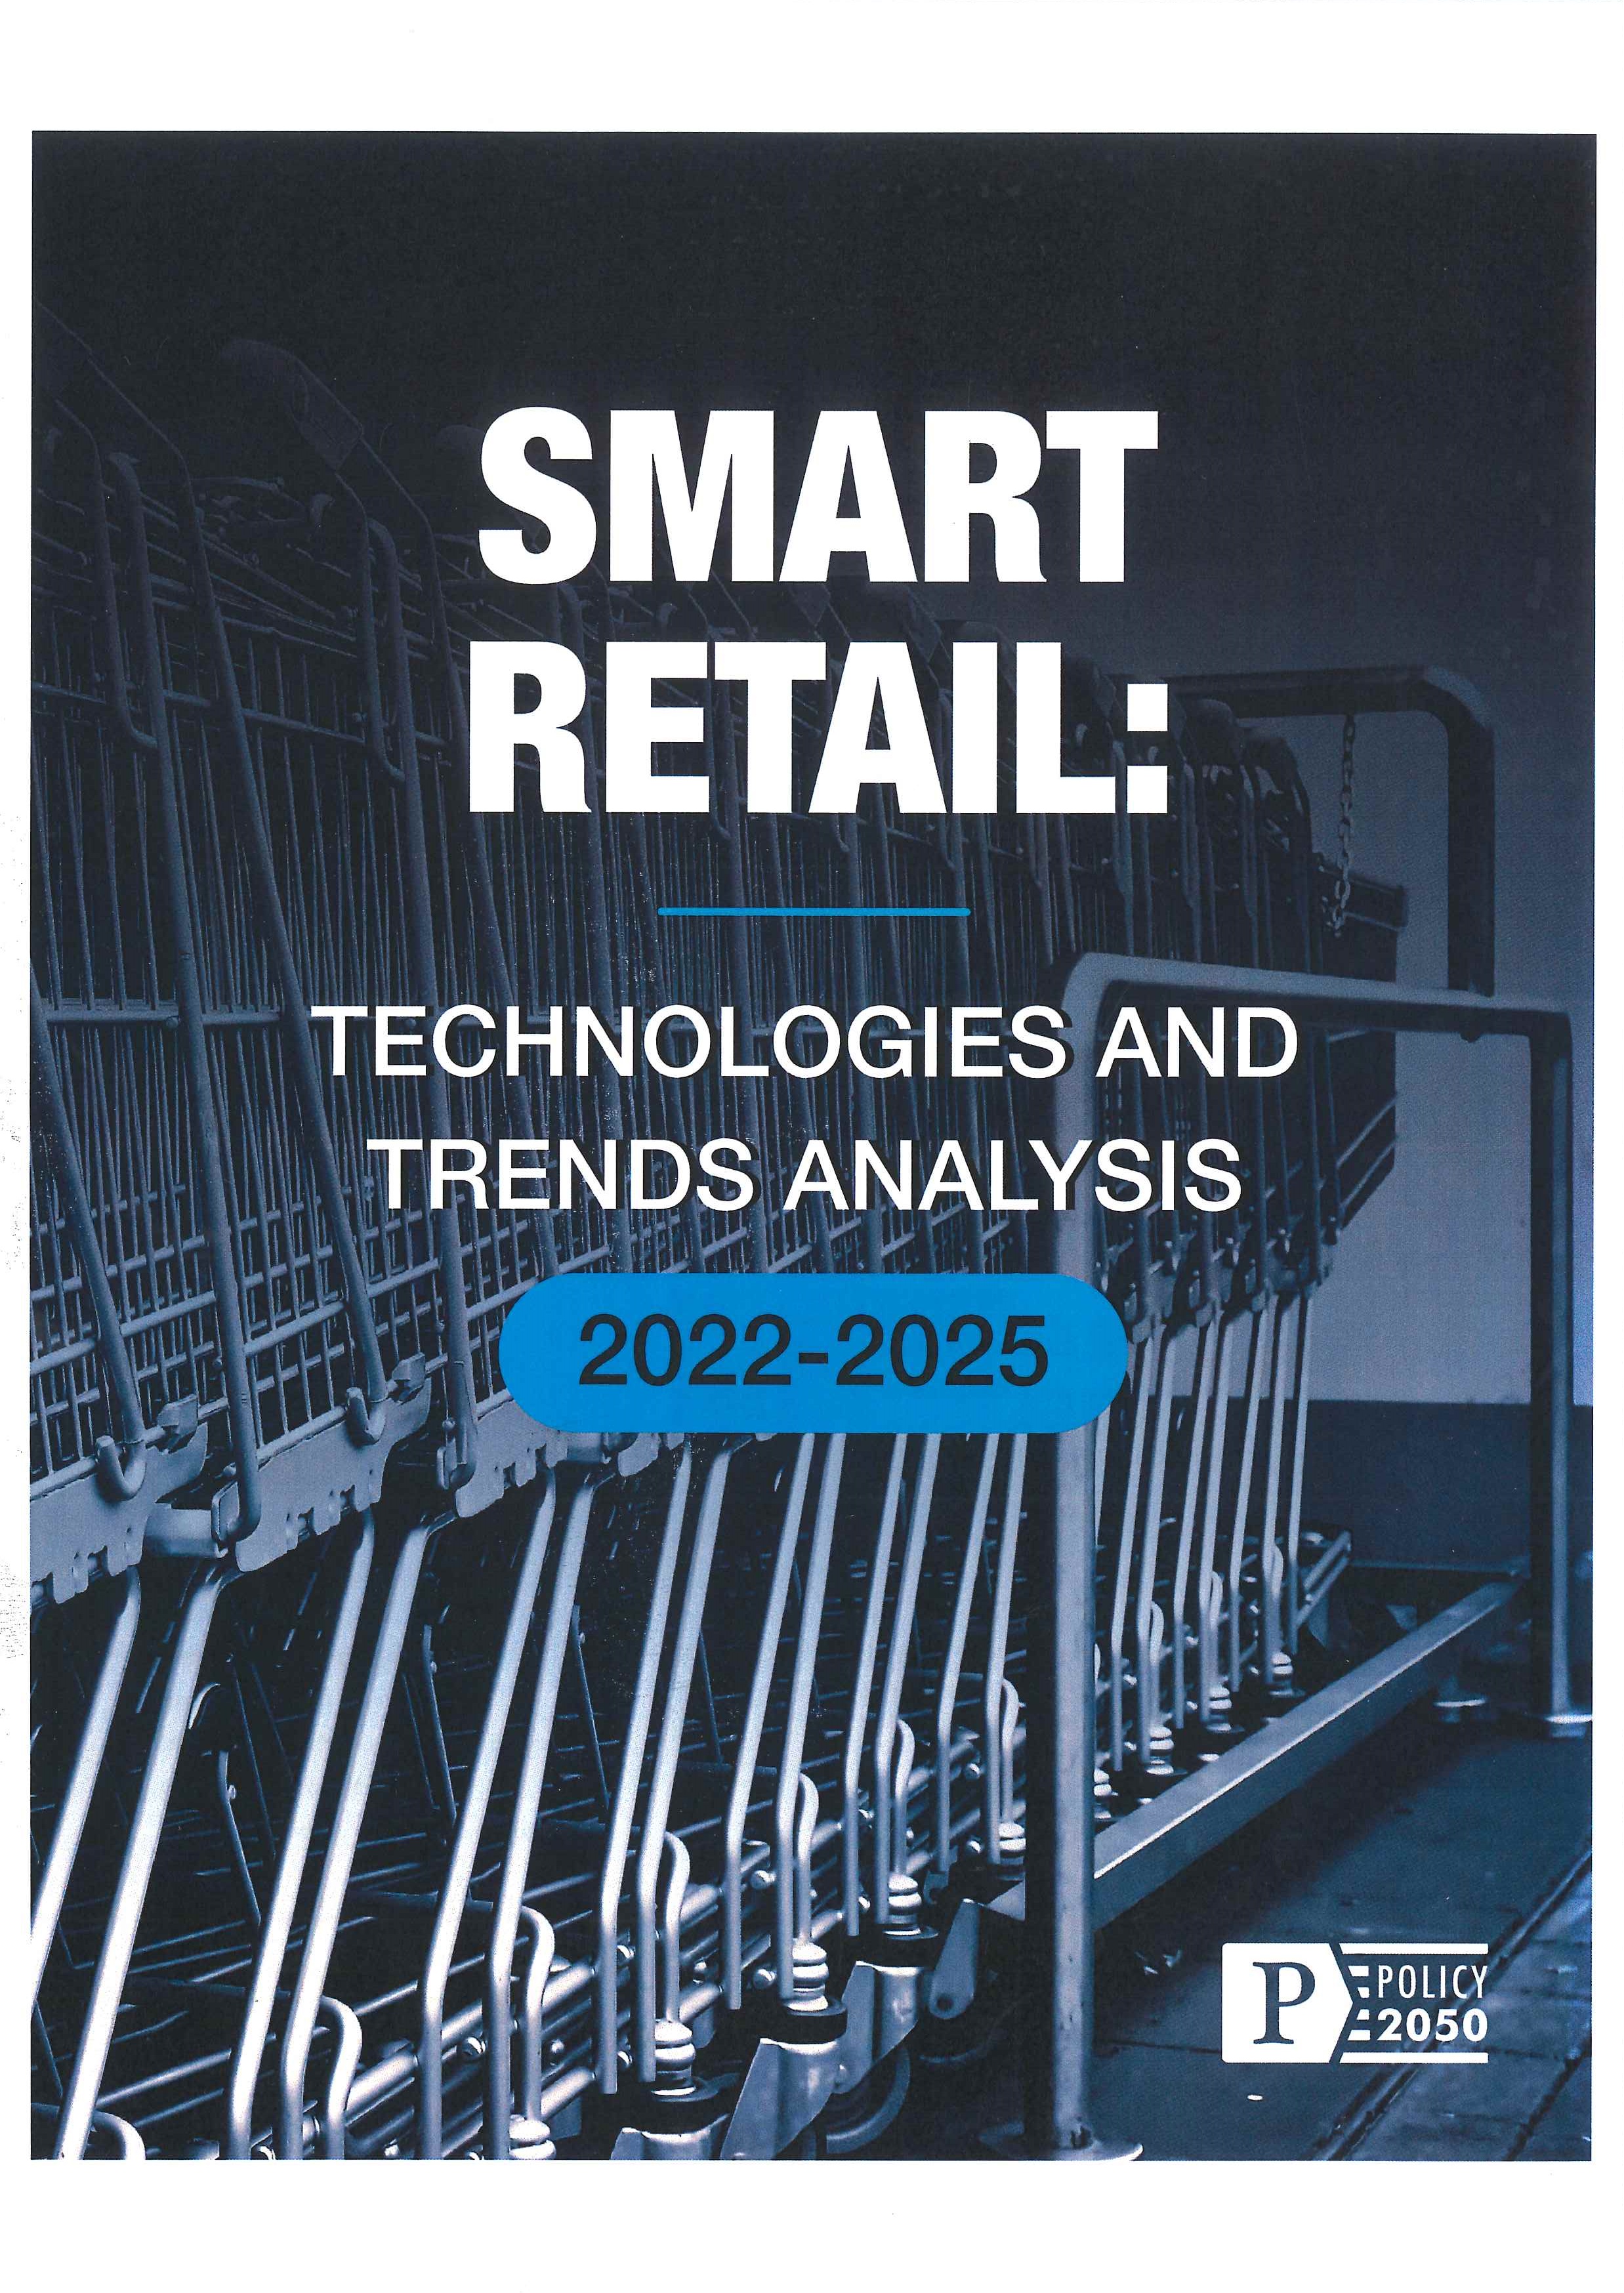 Smart retail [e-book].2022-2025:Technologies and Trends Analysis